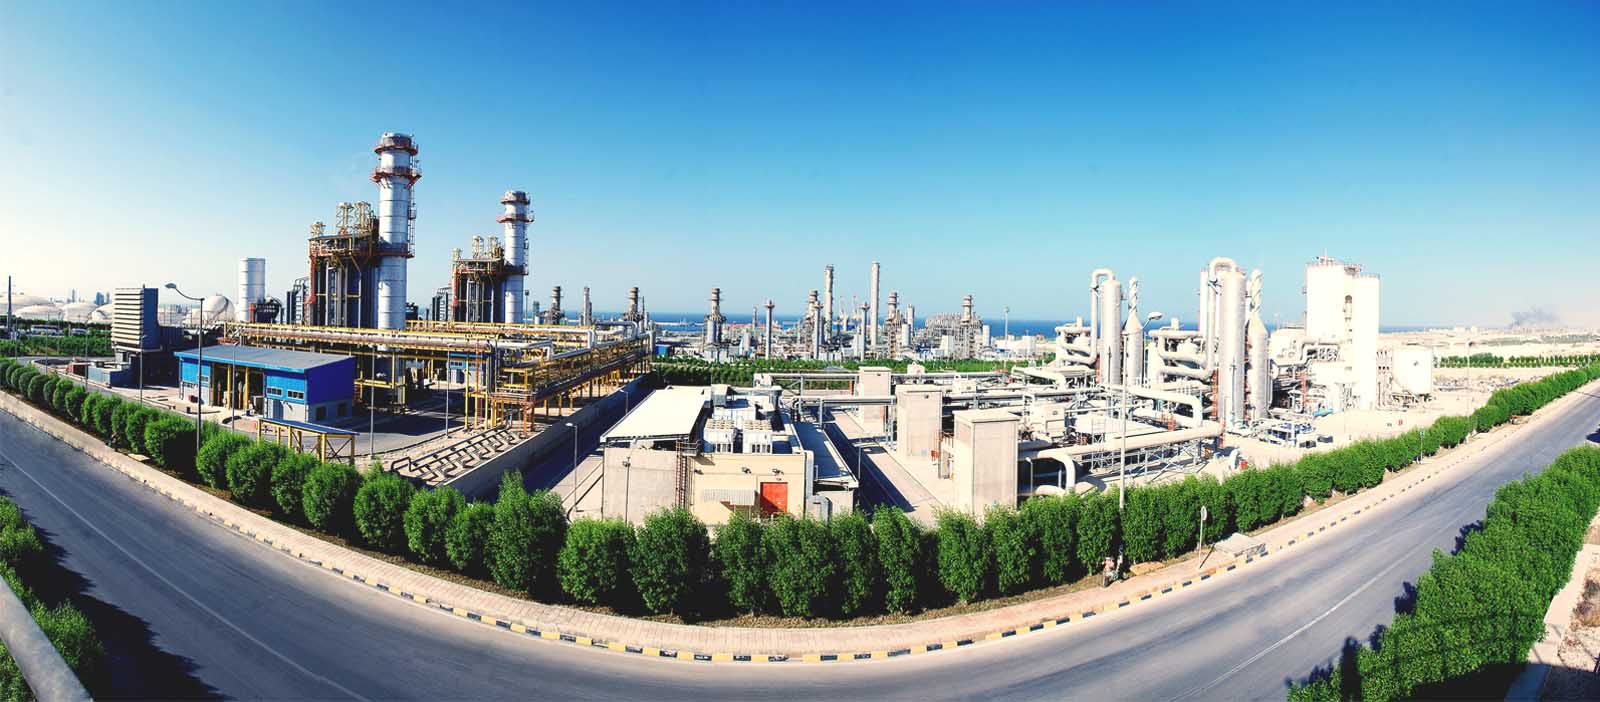 Jump in Petchem Output, Exports